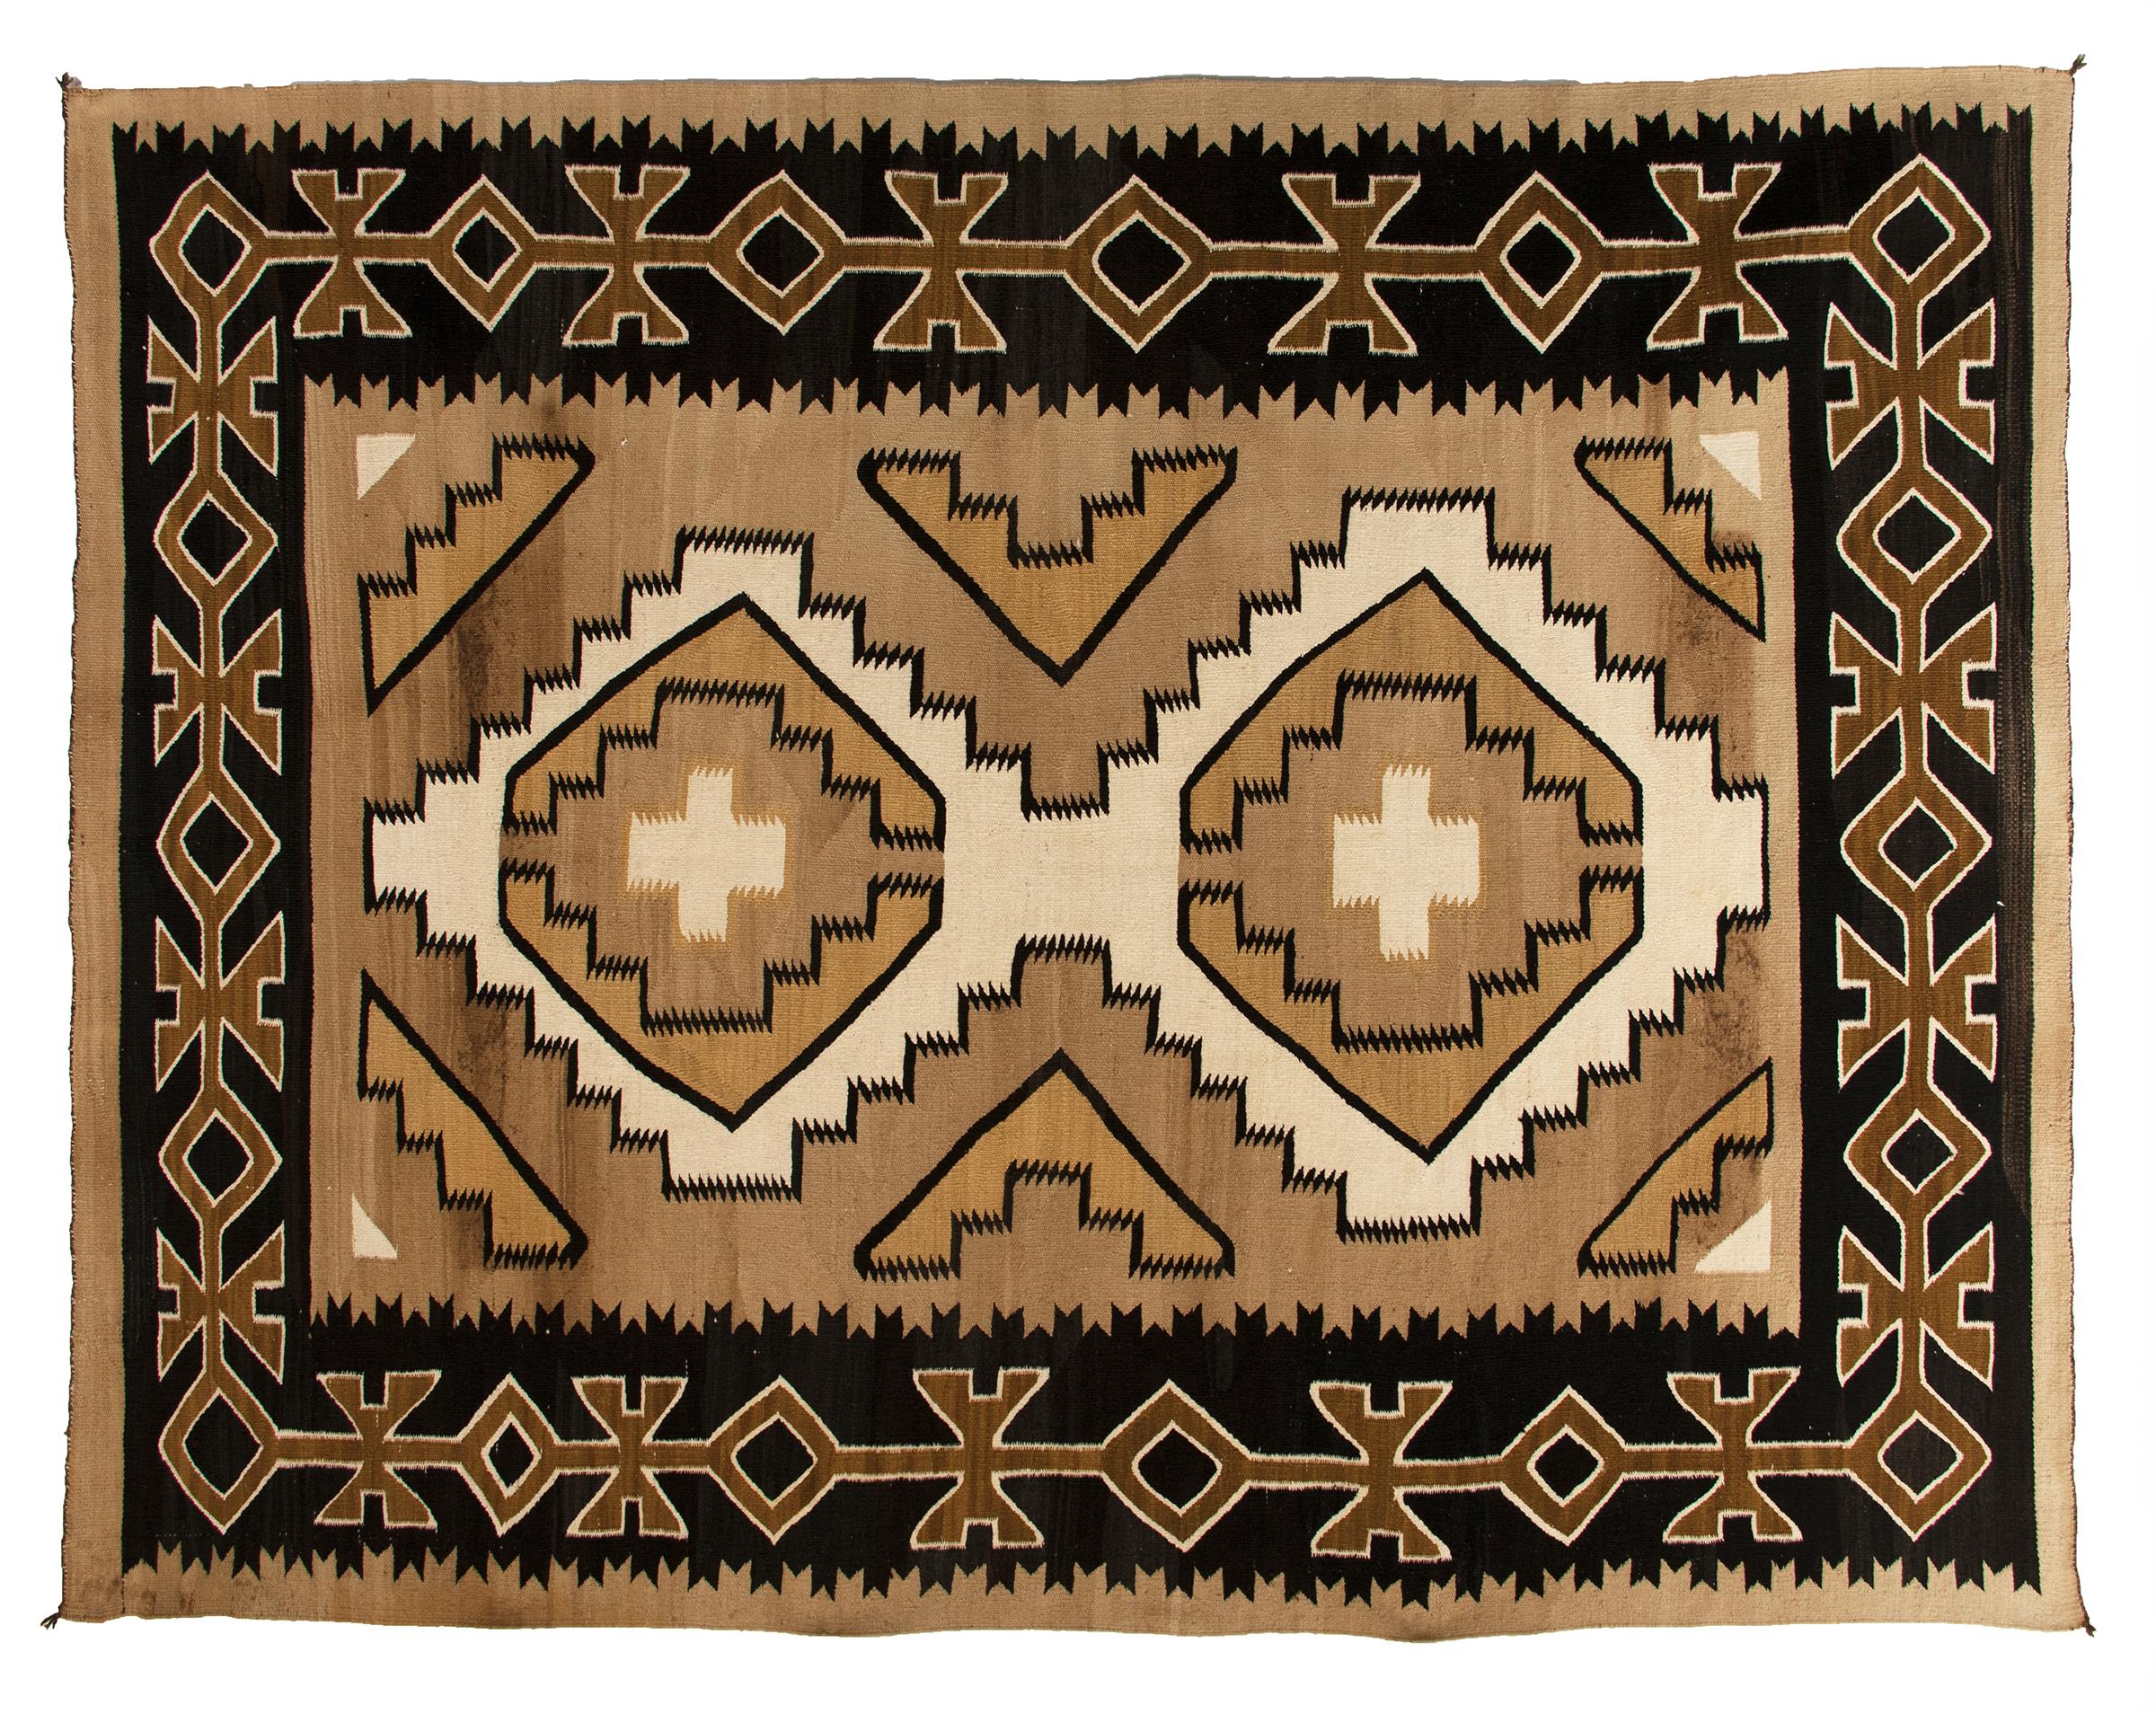 Vintage antique Navajo rug from the crystal trading post, crystal, New Mexico, circa 1930s-1950s. Handwoven by a Navajo weaver of native hand-spun wool in natural fleece colors of black, brown, camel and ivory. This textile is well suited for use on